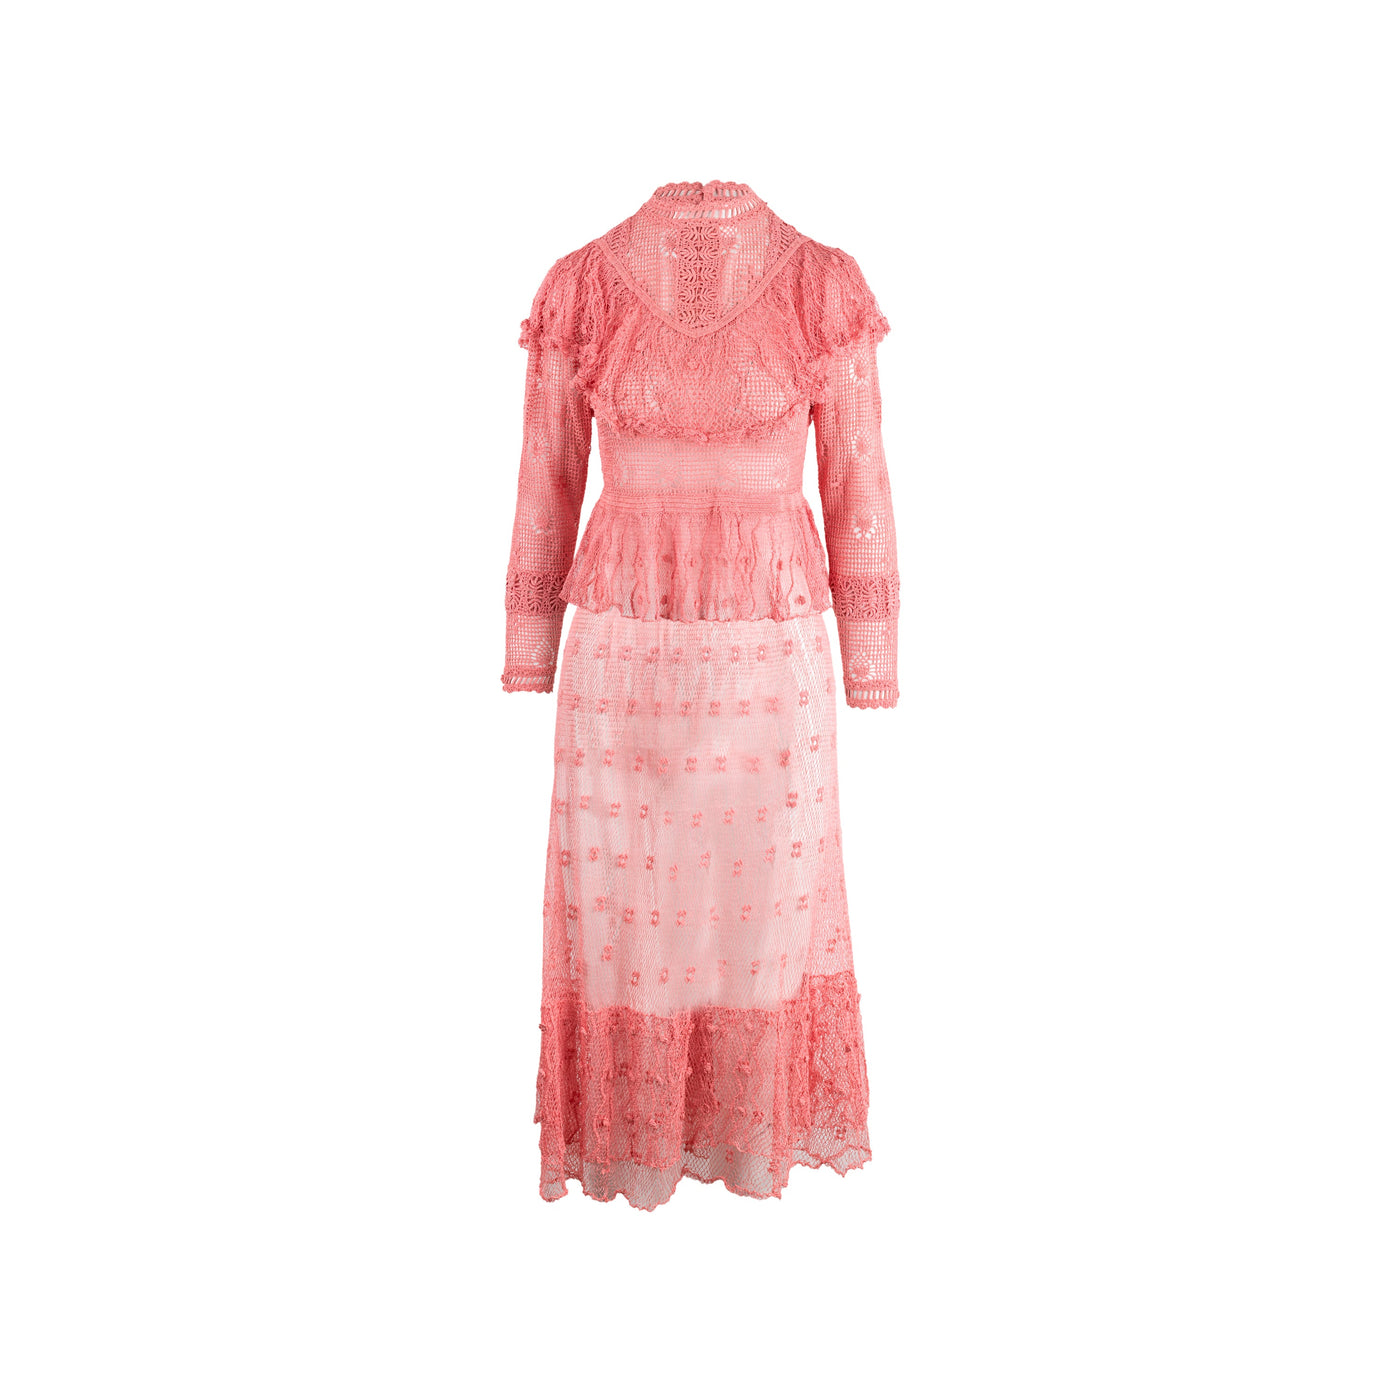 Collection Privée pink macramè skirt pre-owned